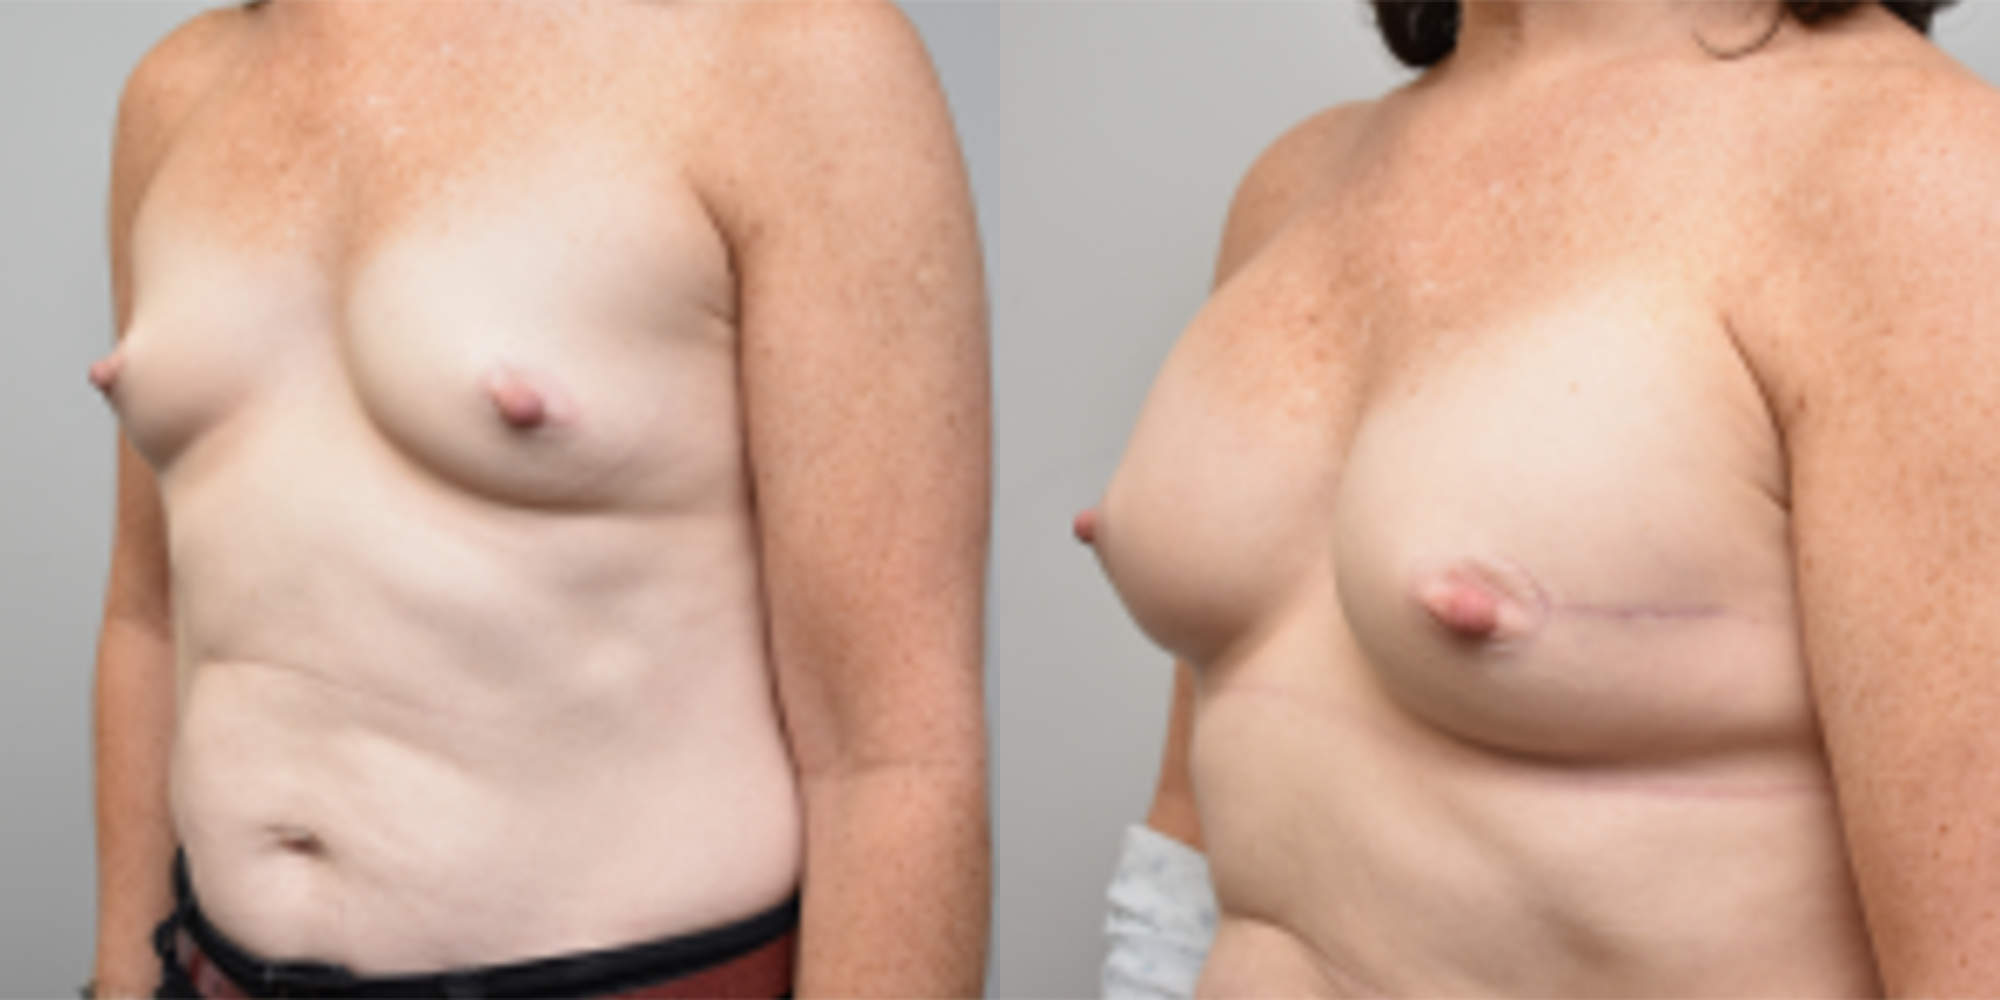 Breast Reconstruction Before and After photo by Susan Gannon, MD of The Plastic Surgery Group in Albany, NY